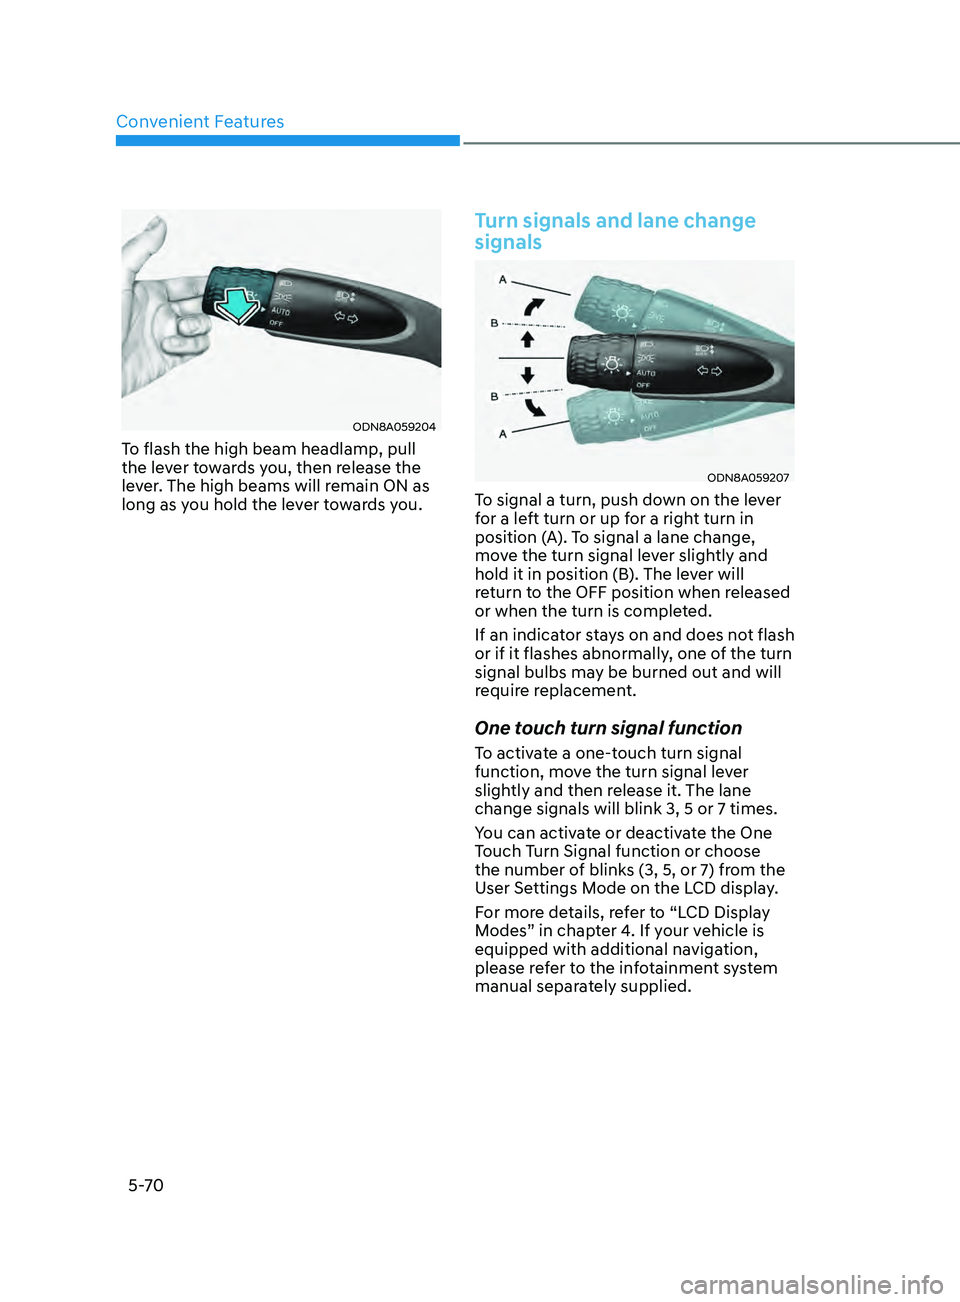 HYUNDAI ELANTRA SEL 2021  Owners Manual Convenient Features
5-70
ODN8A059204
To flash the high beam headlamp, pull 
the lever towards you, then release the 
lever. The high beams will remain ON as 
long as you hold the lever towards you.
Tu